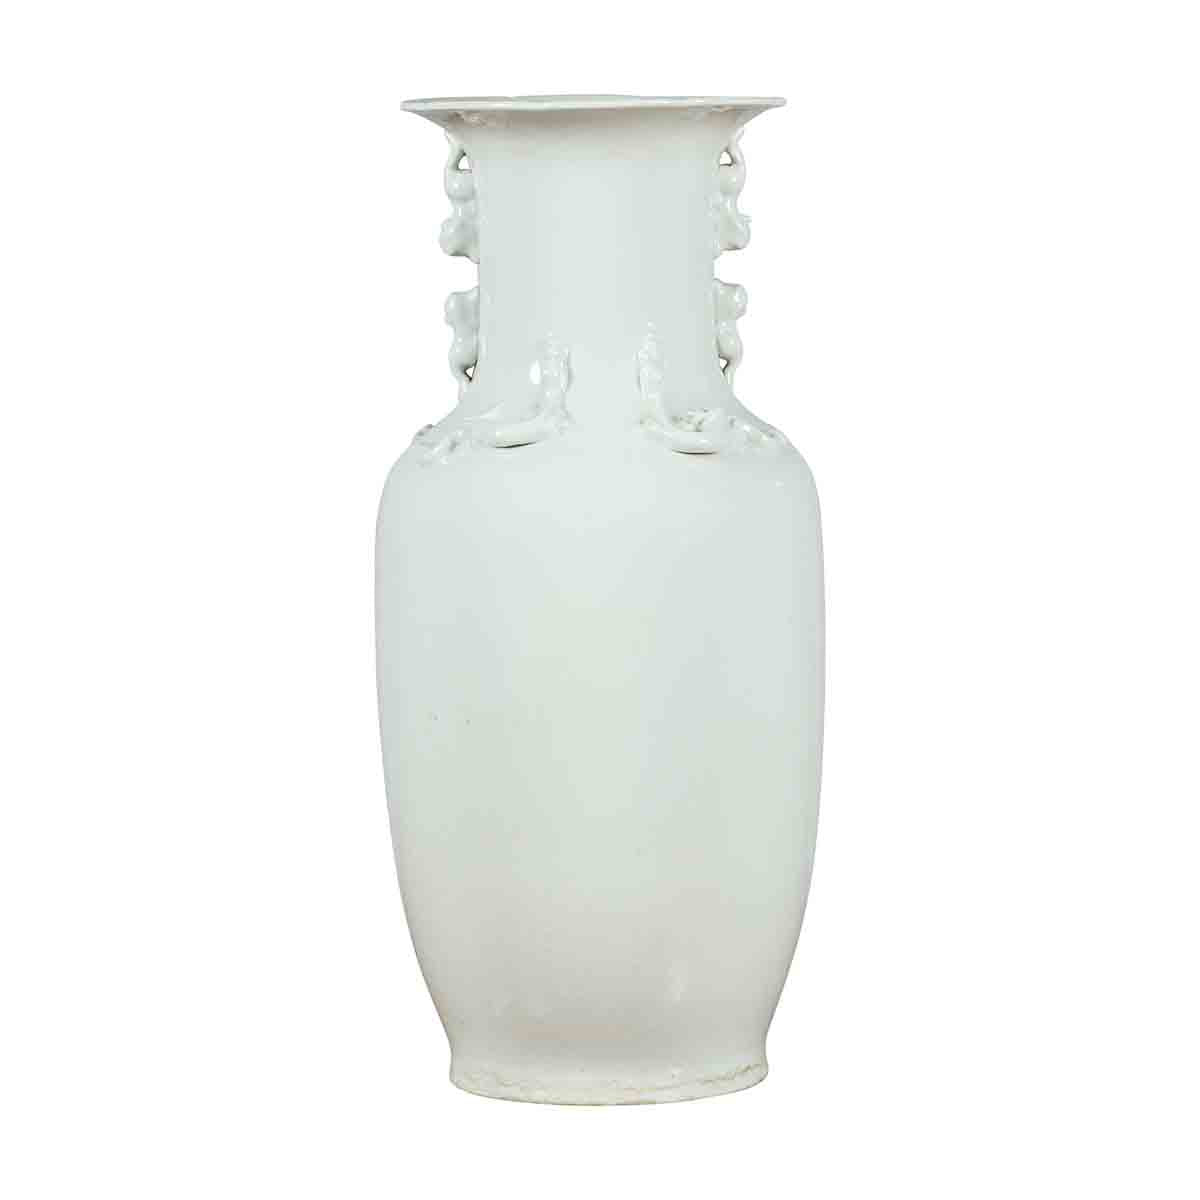 Blanc de Chine – white porcelain from China · V&A